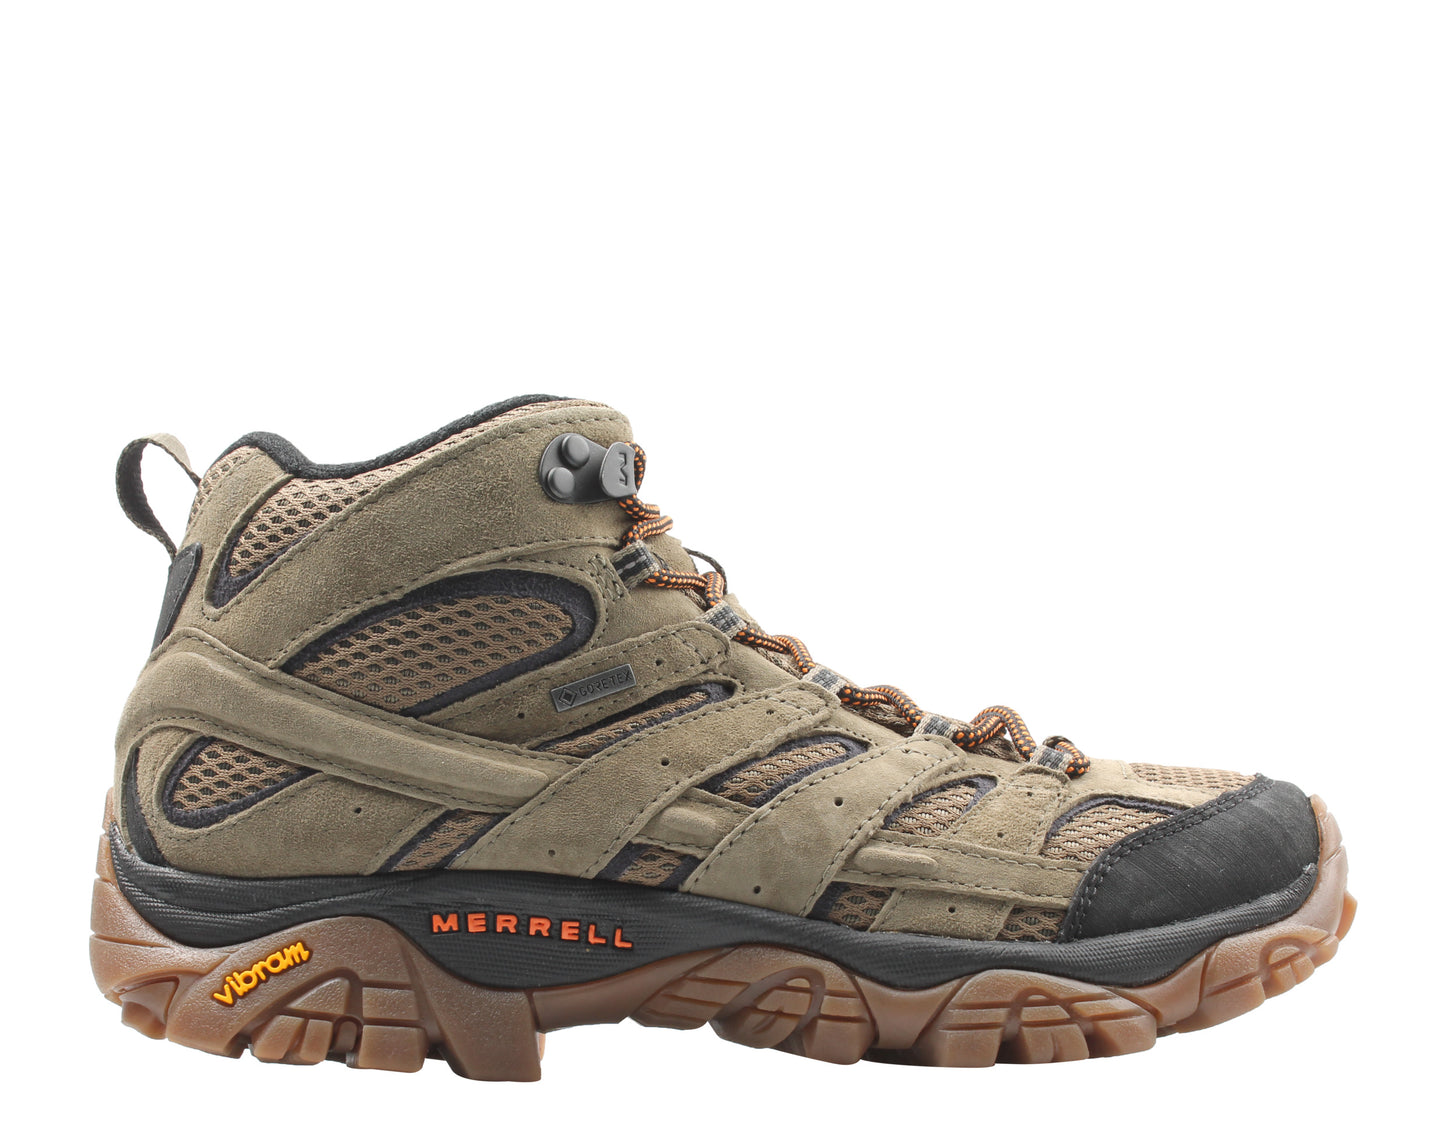 Merrell Moab 2 Leather Mid GORE-TEX Olive Men's Hiking Boots J589953